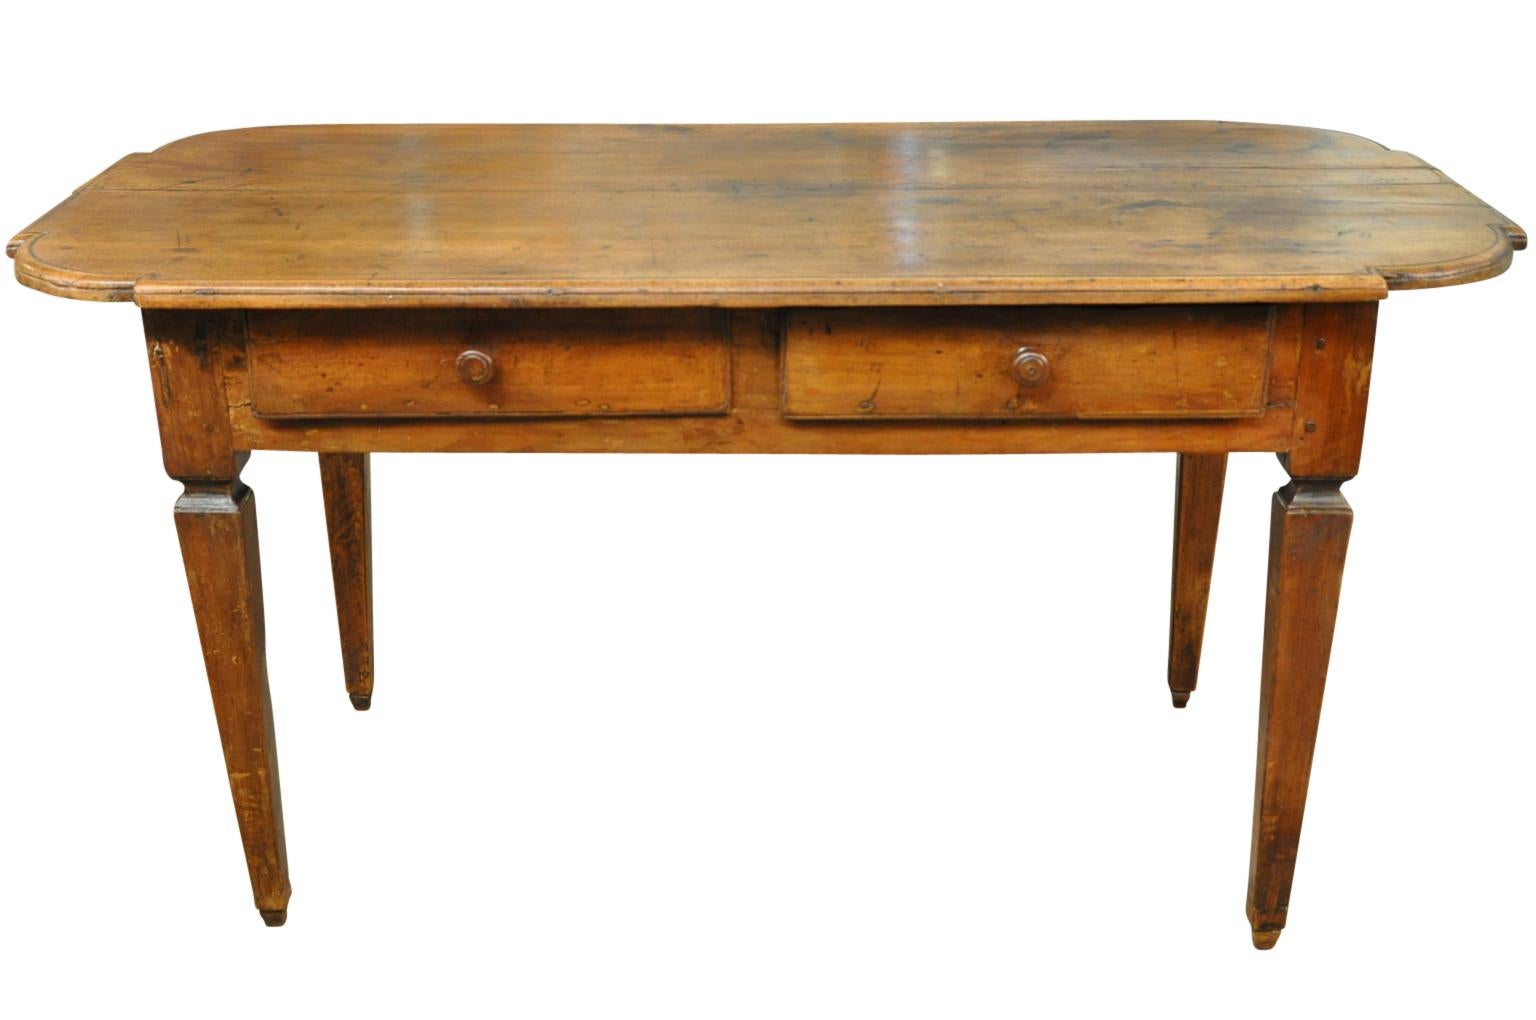 A very handsome 18th century period Louis XVI two-drawer desk from Northern Italy. Wonderfully and soundly constructed from walnut. Gorgeous patina.